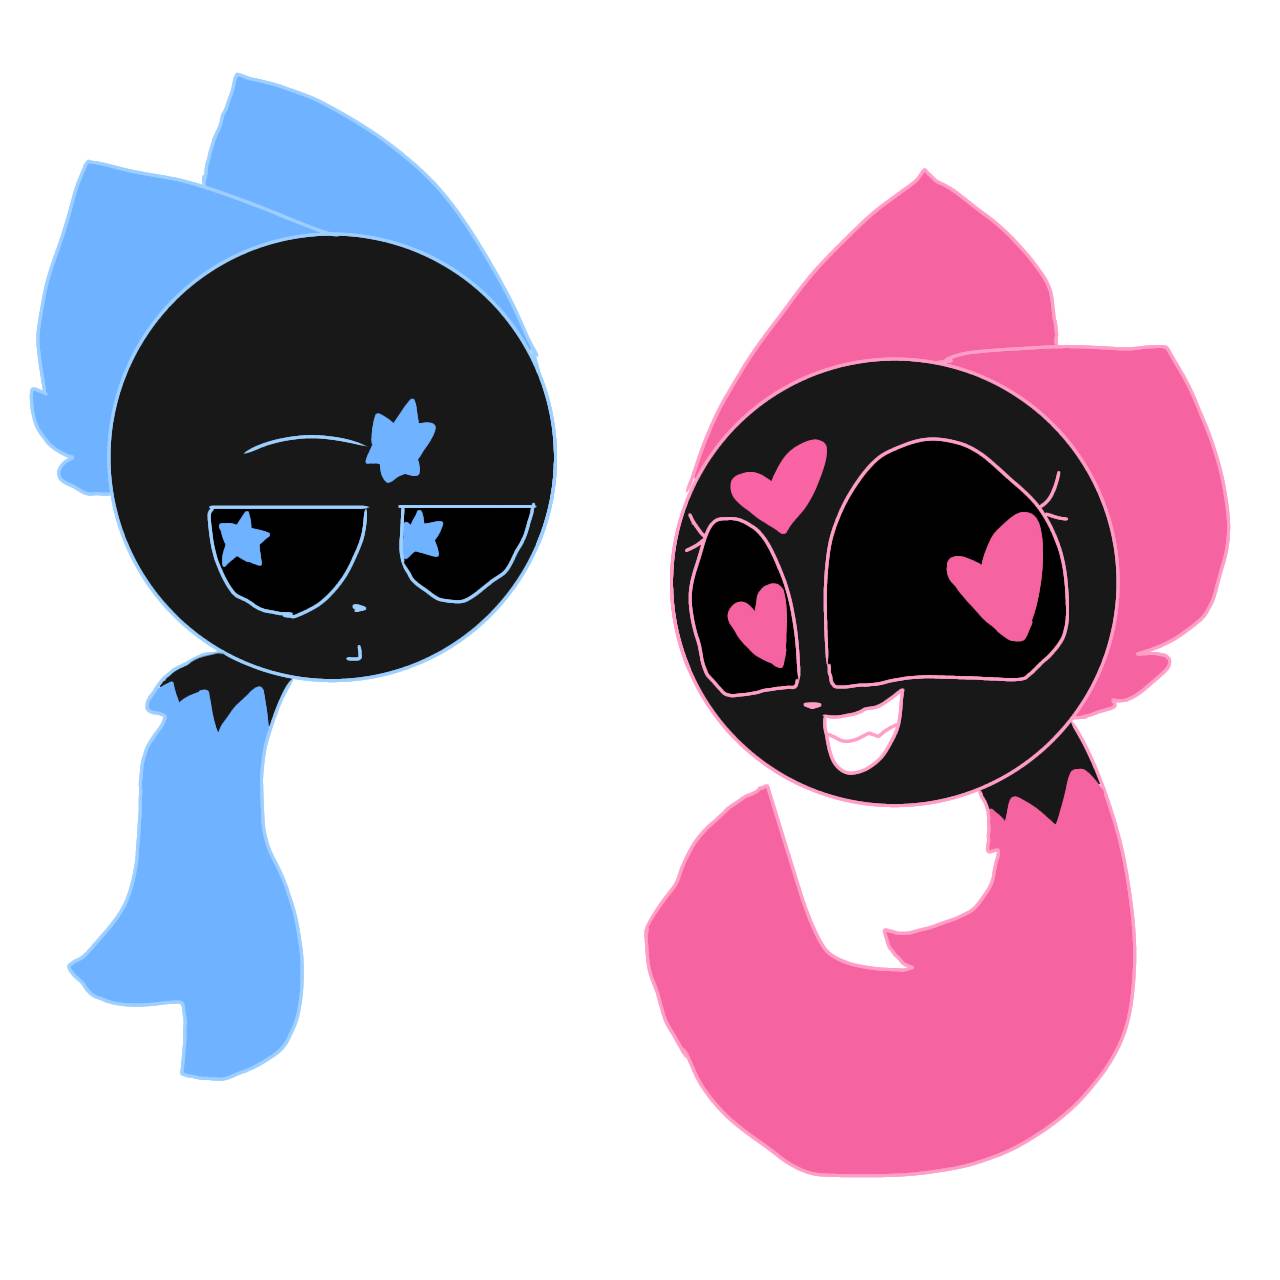 Just Shapes And Beats Wave by bluegamerheart on DeviantArt